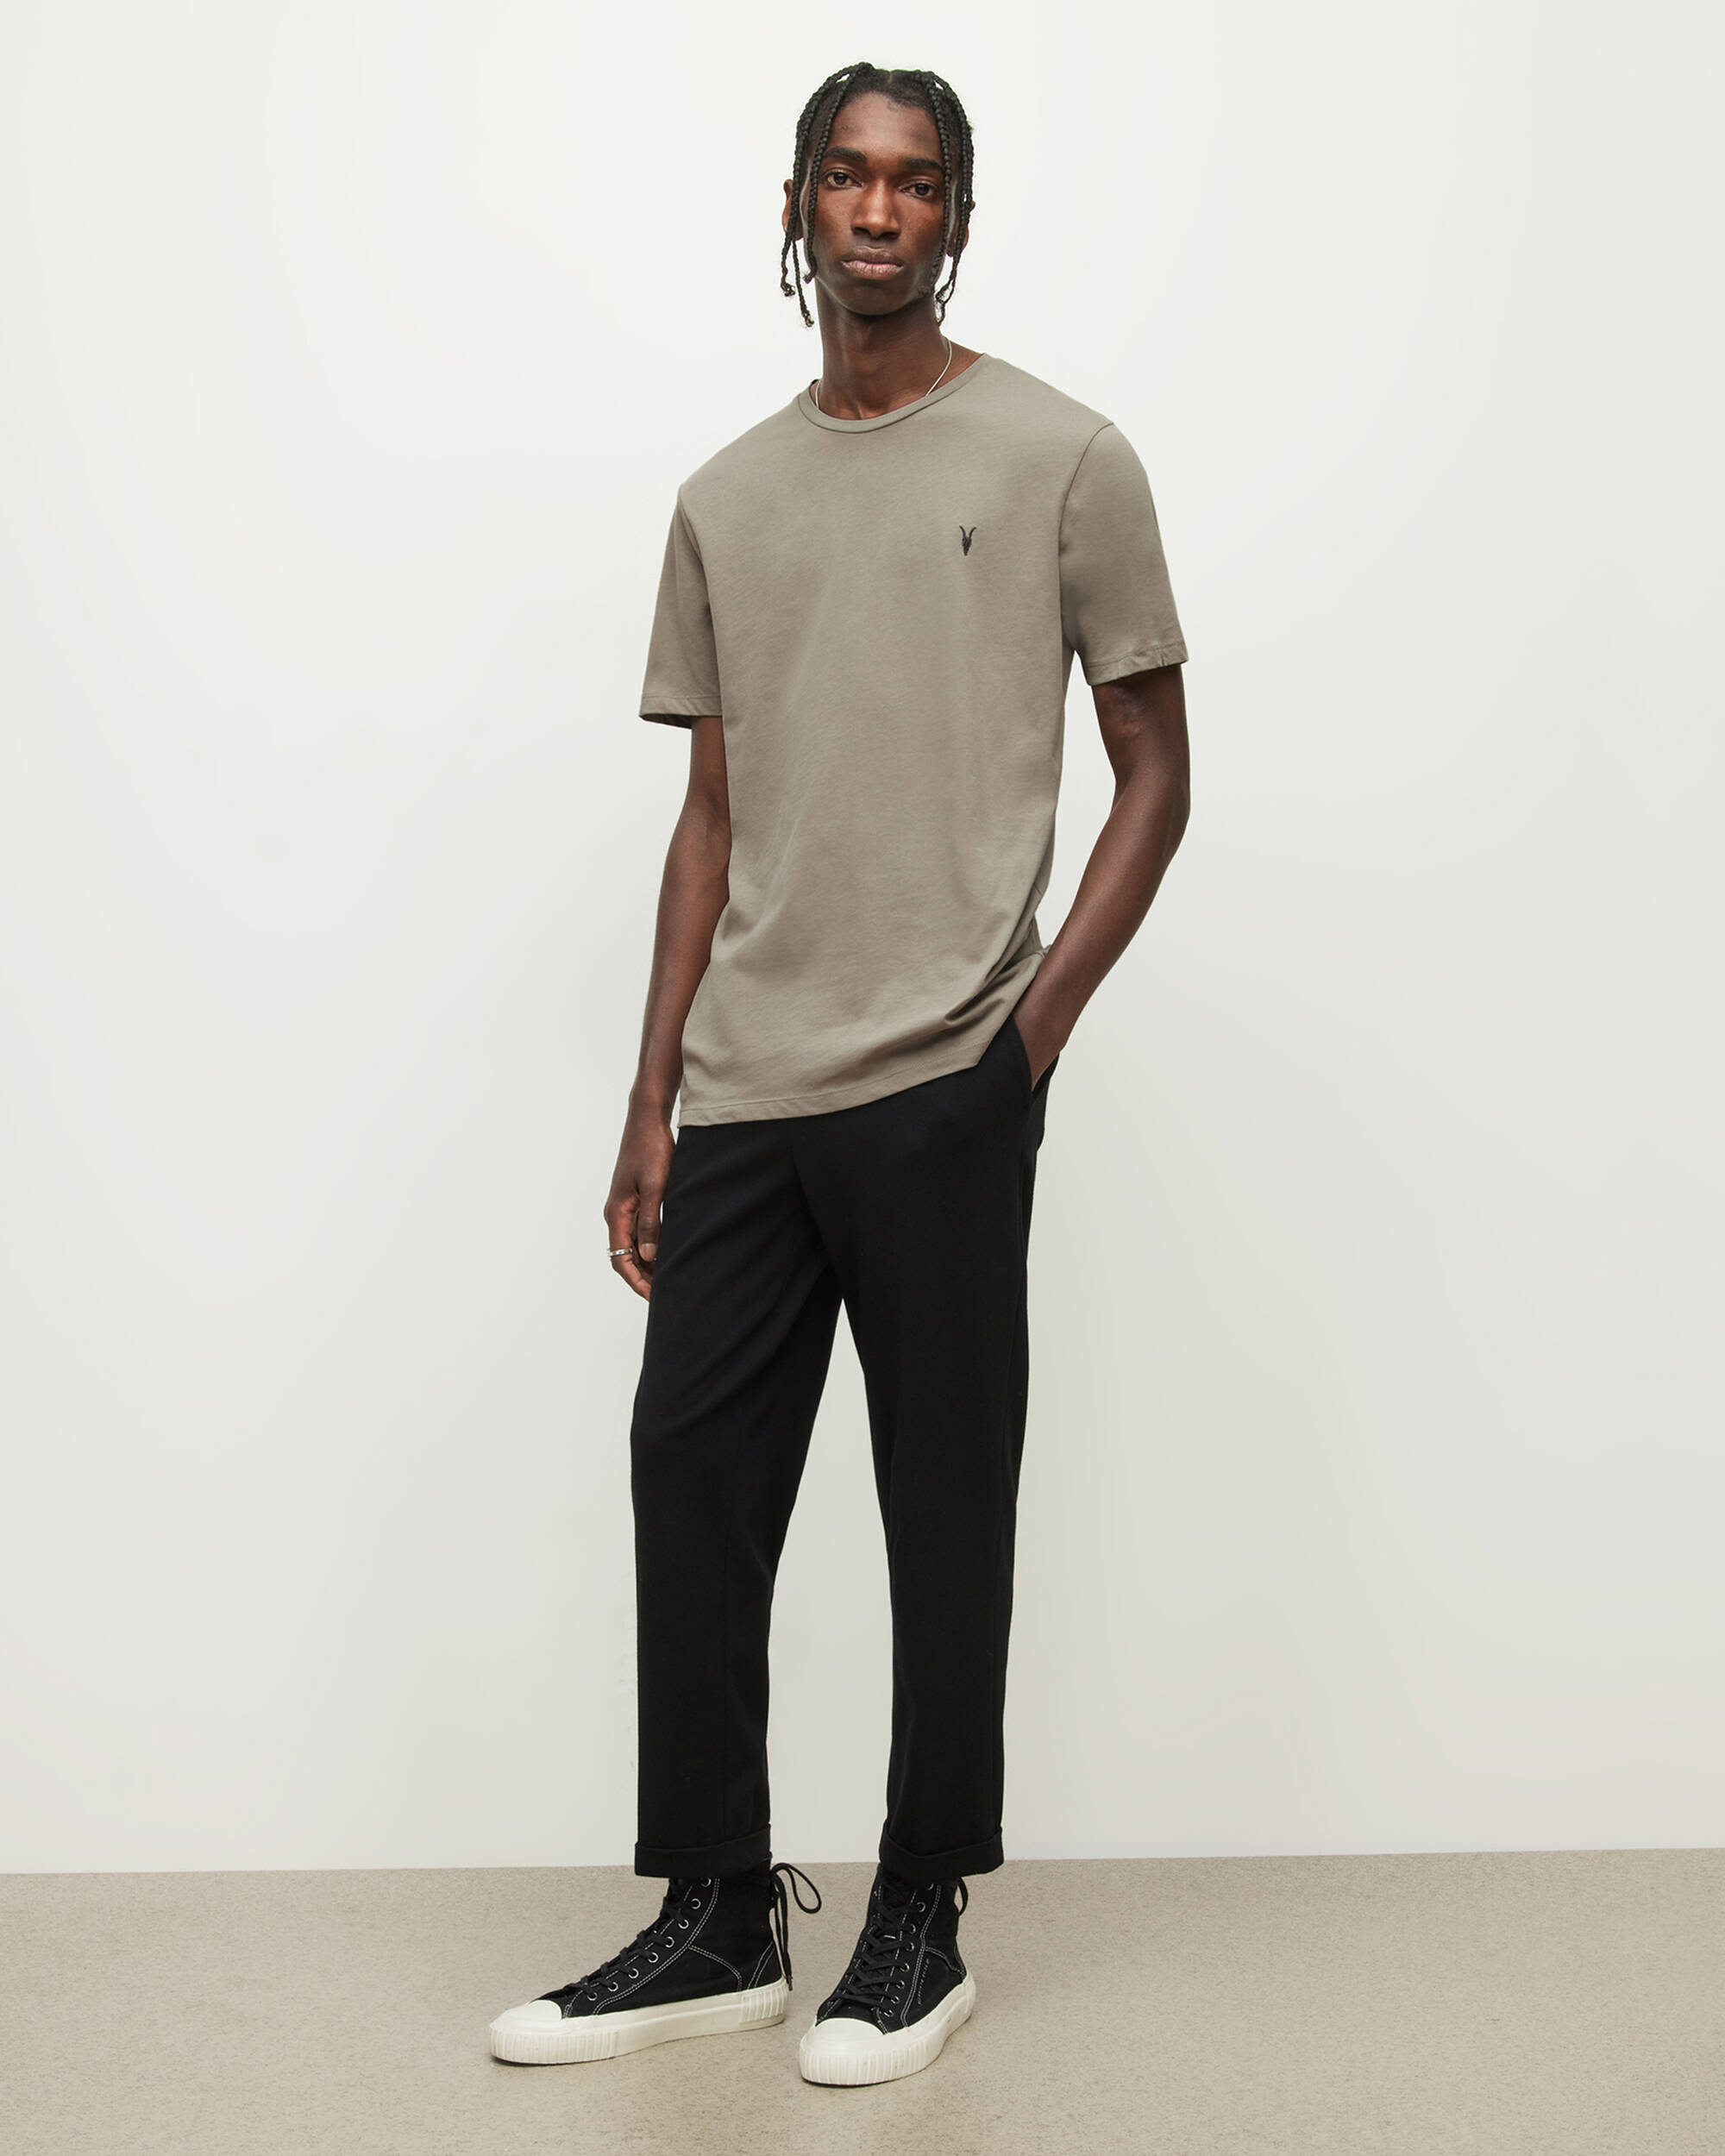 Brace Crew T-Shirt 3 Pack GRY/TOASTED/BRWN | ALLSAINTS